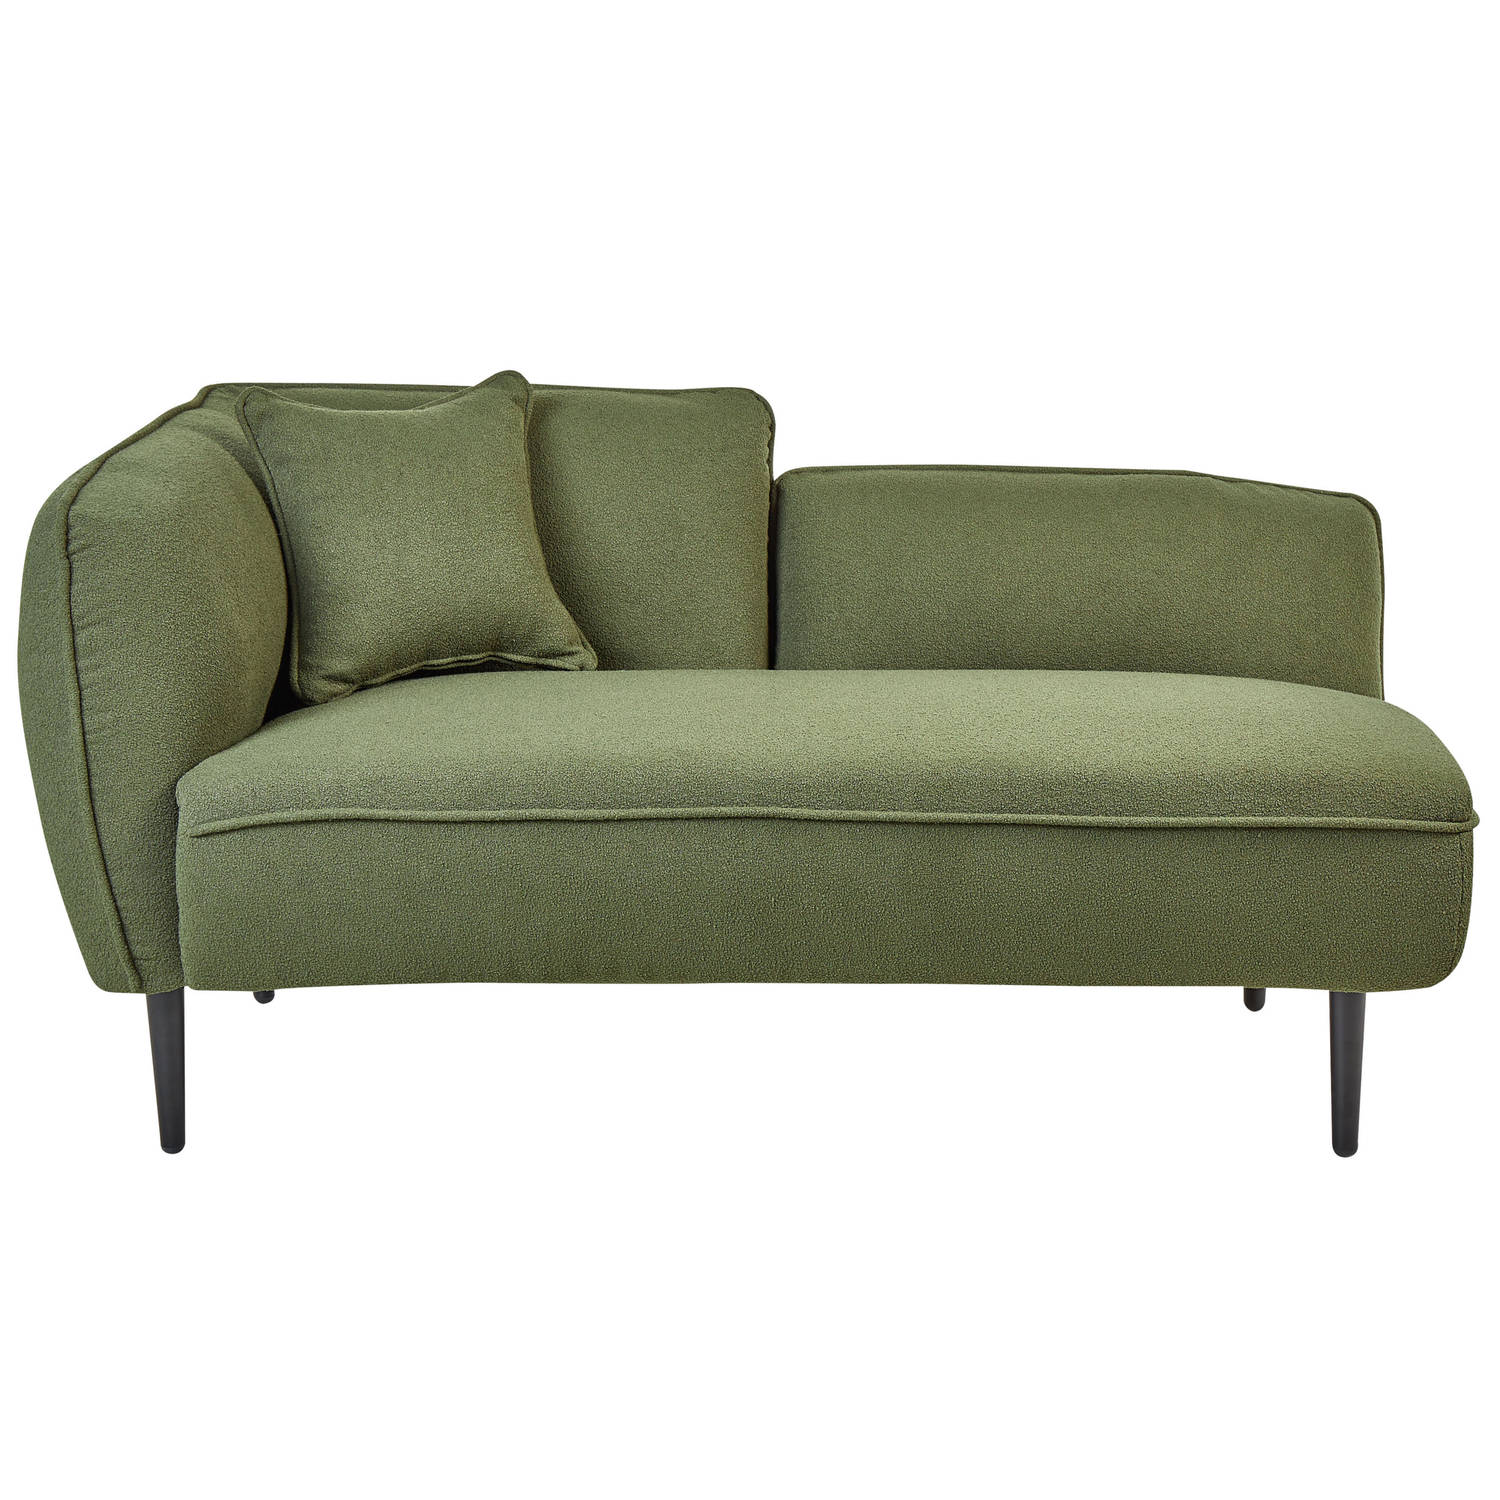 CHEVANNES - Chaise longue - Donkergroen - Linkszijdig - Polyester